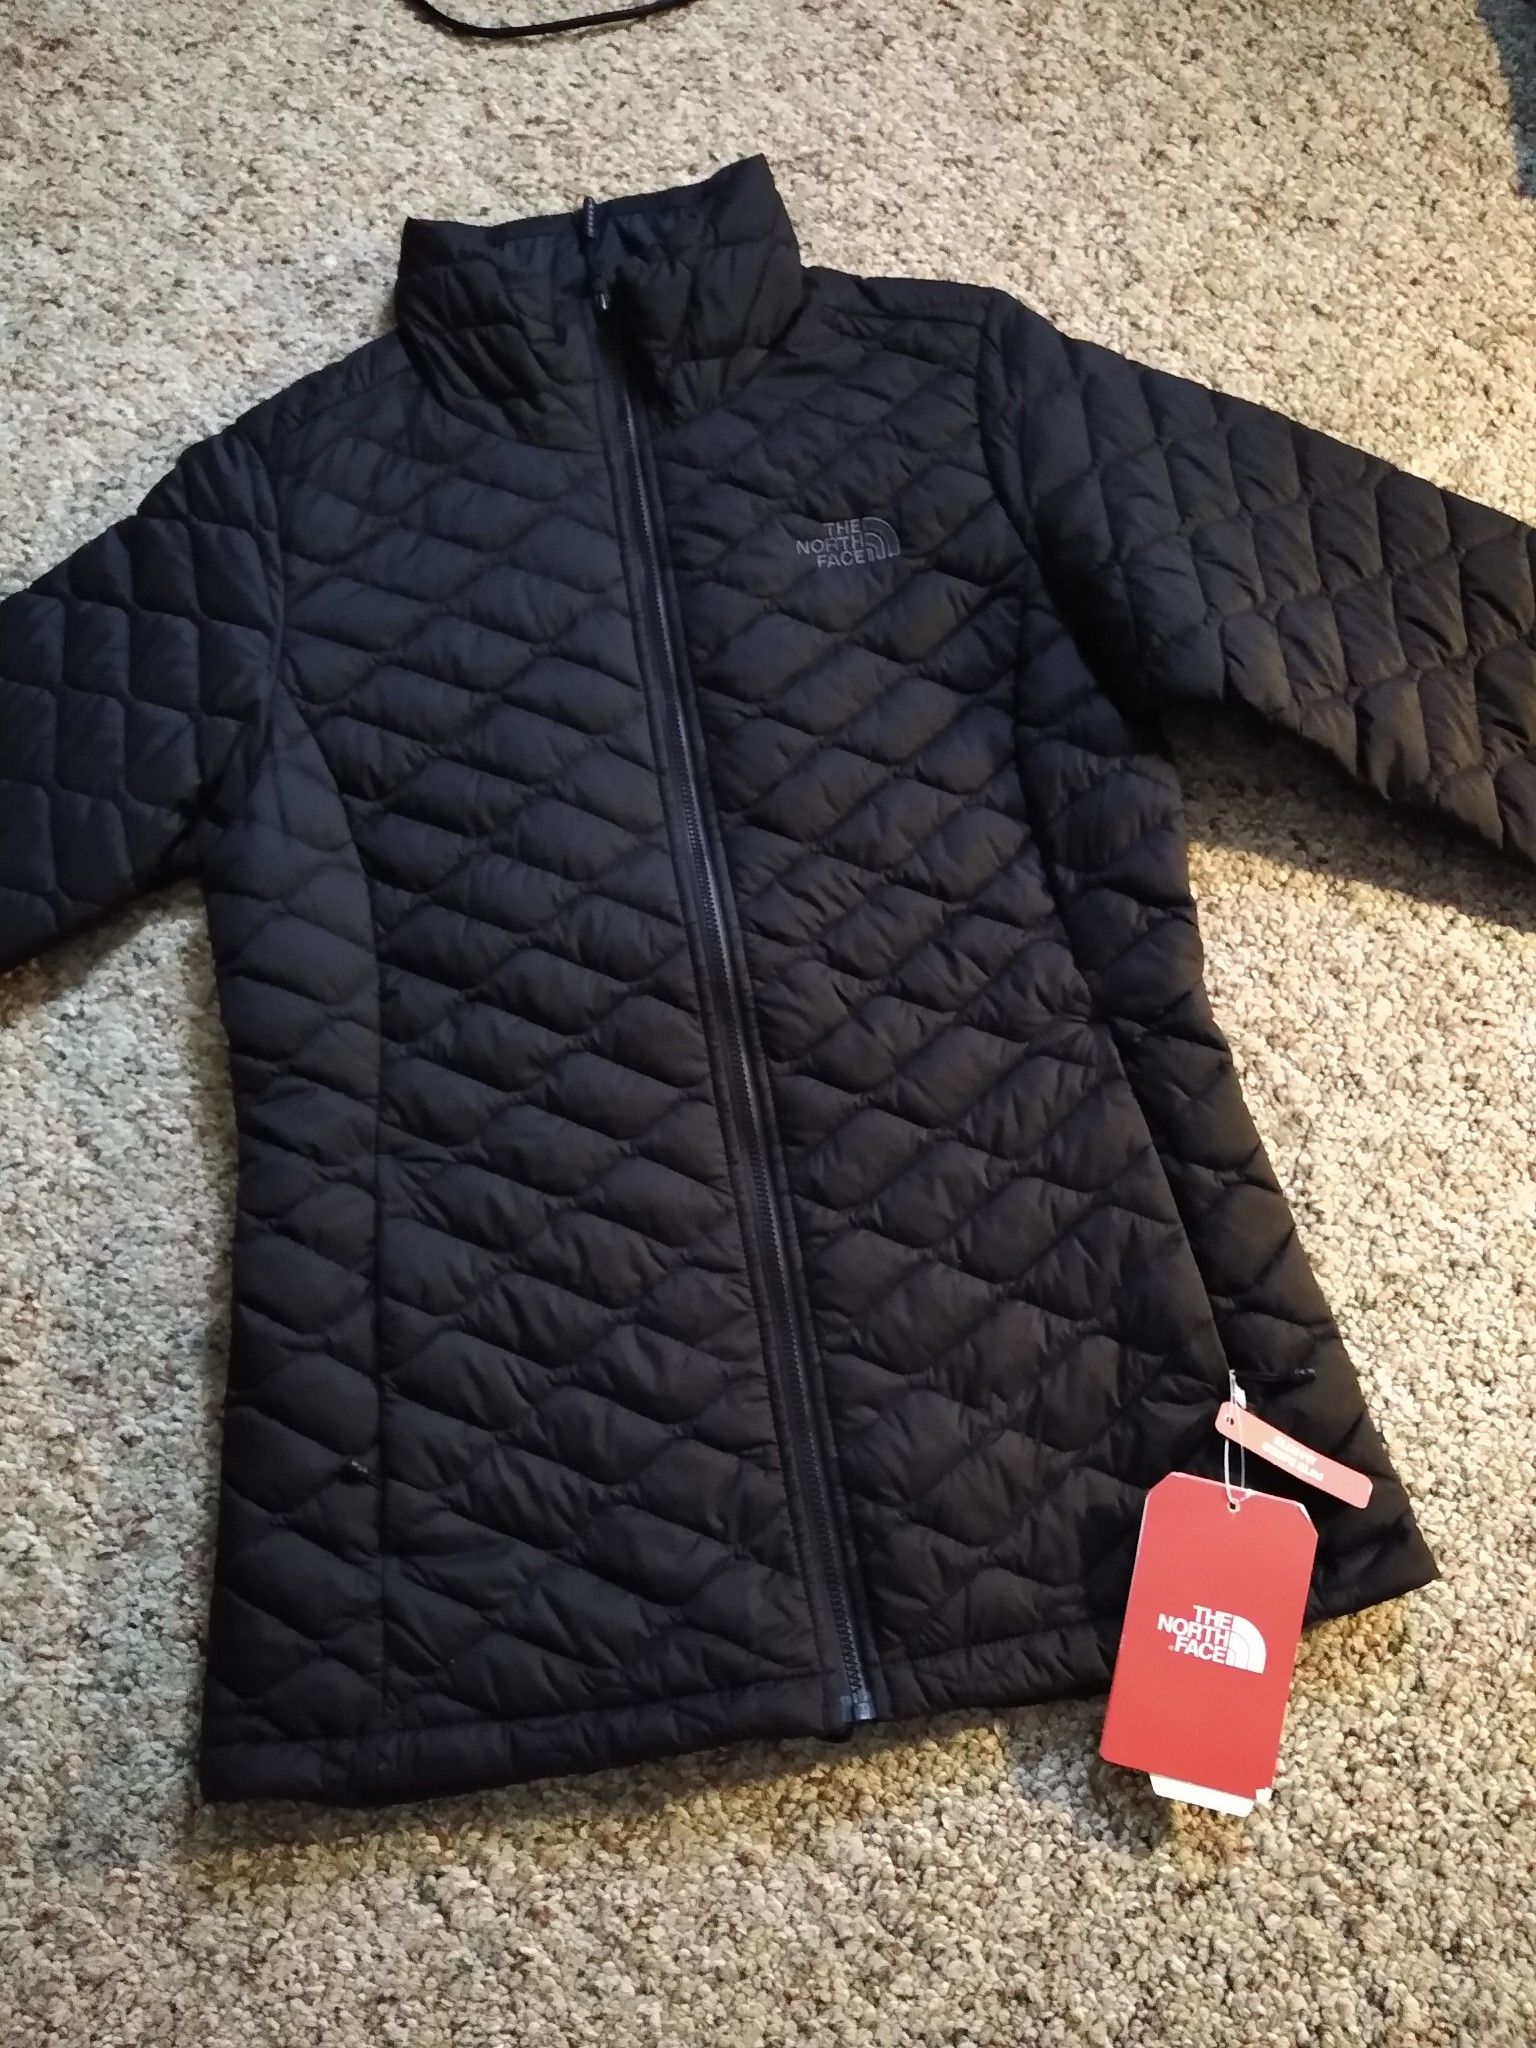 North Face size small women's